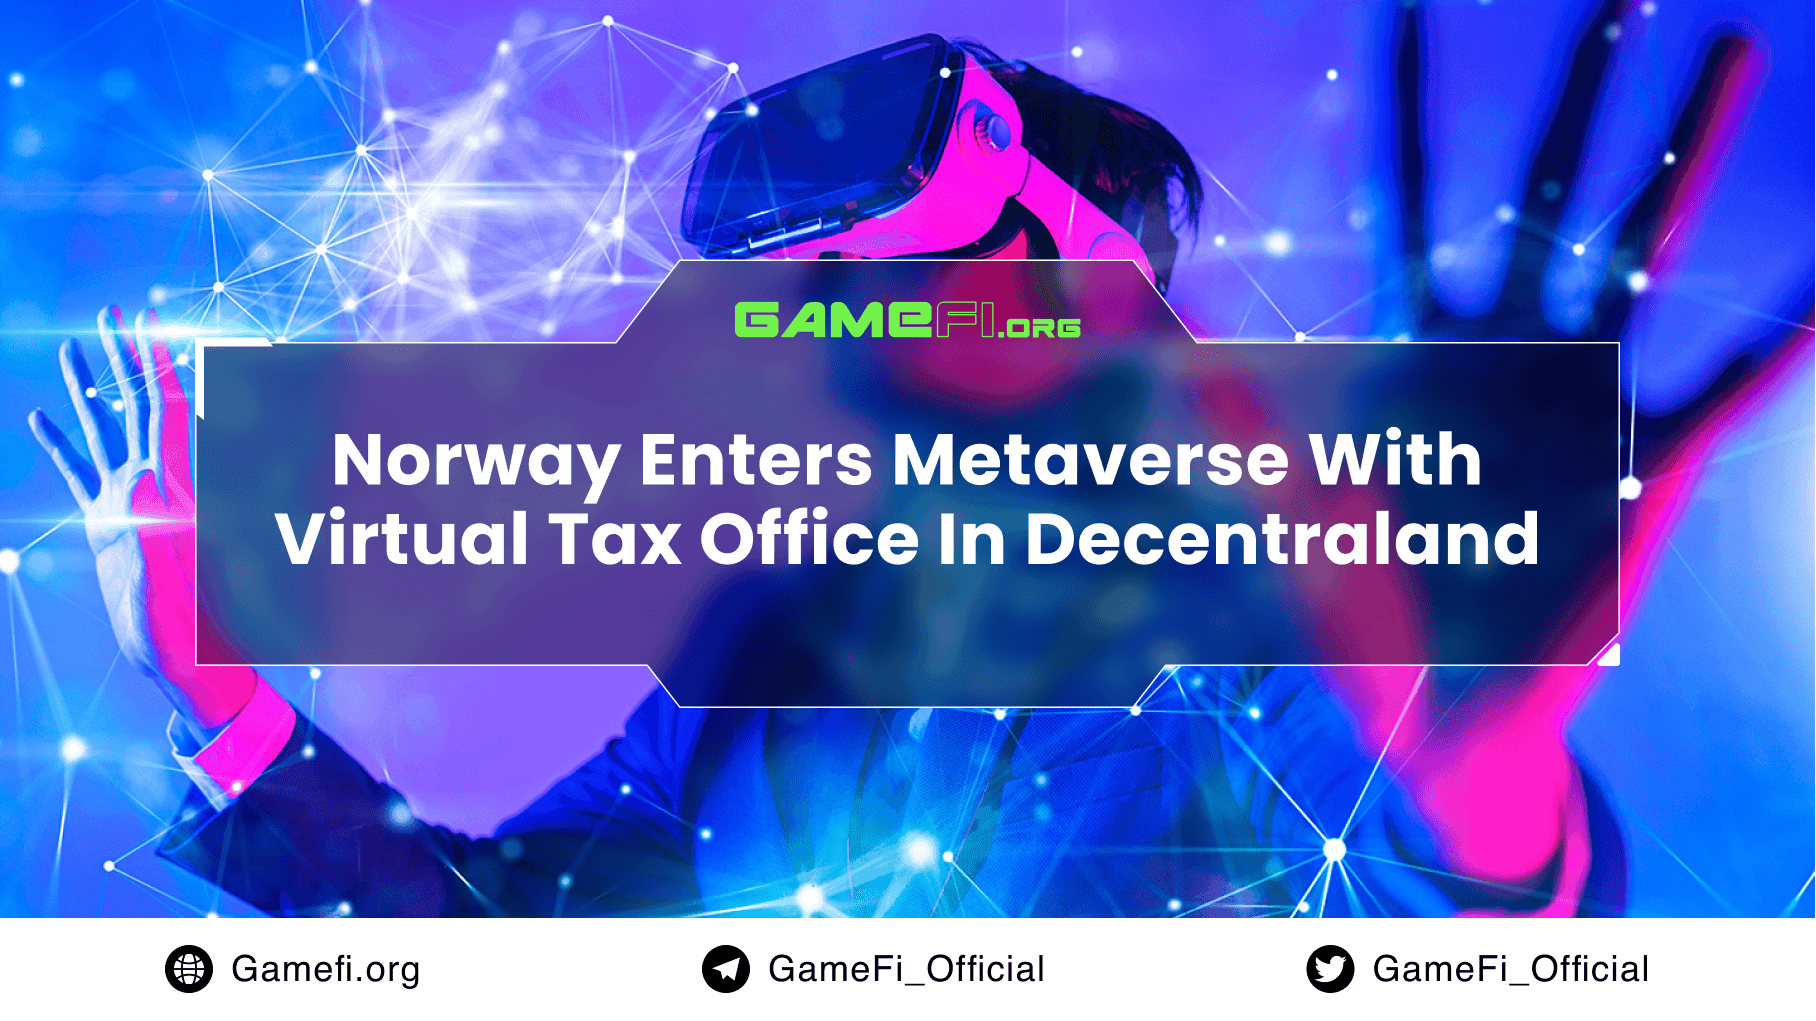 Norway Enters Metaverse with Virtual Tax Office in Decentraland